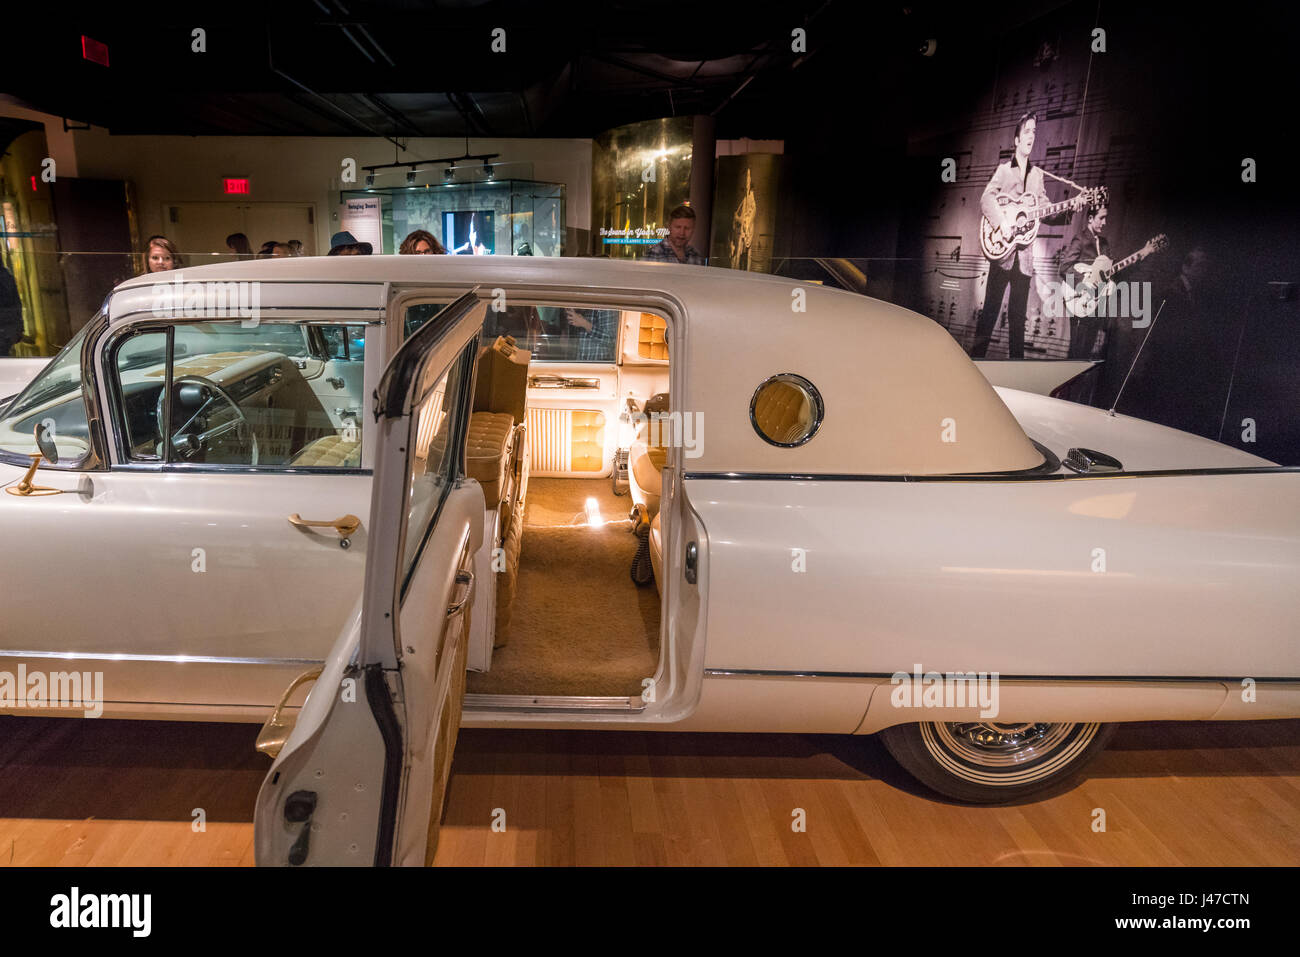 Elvis Presley's custom 'gold Cadillac' presso il Country Music Hall of Fame, Nashville Foto Stock